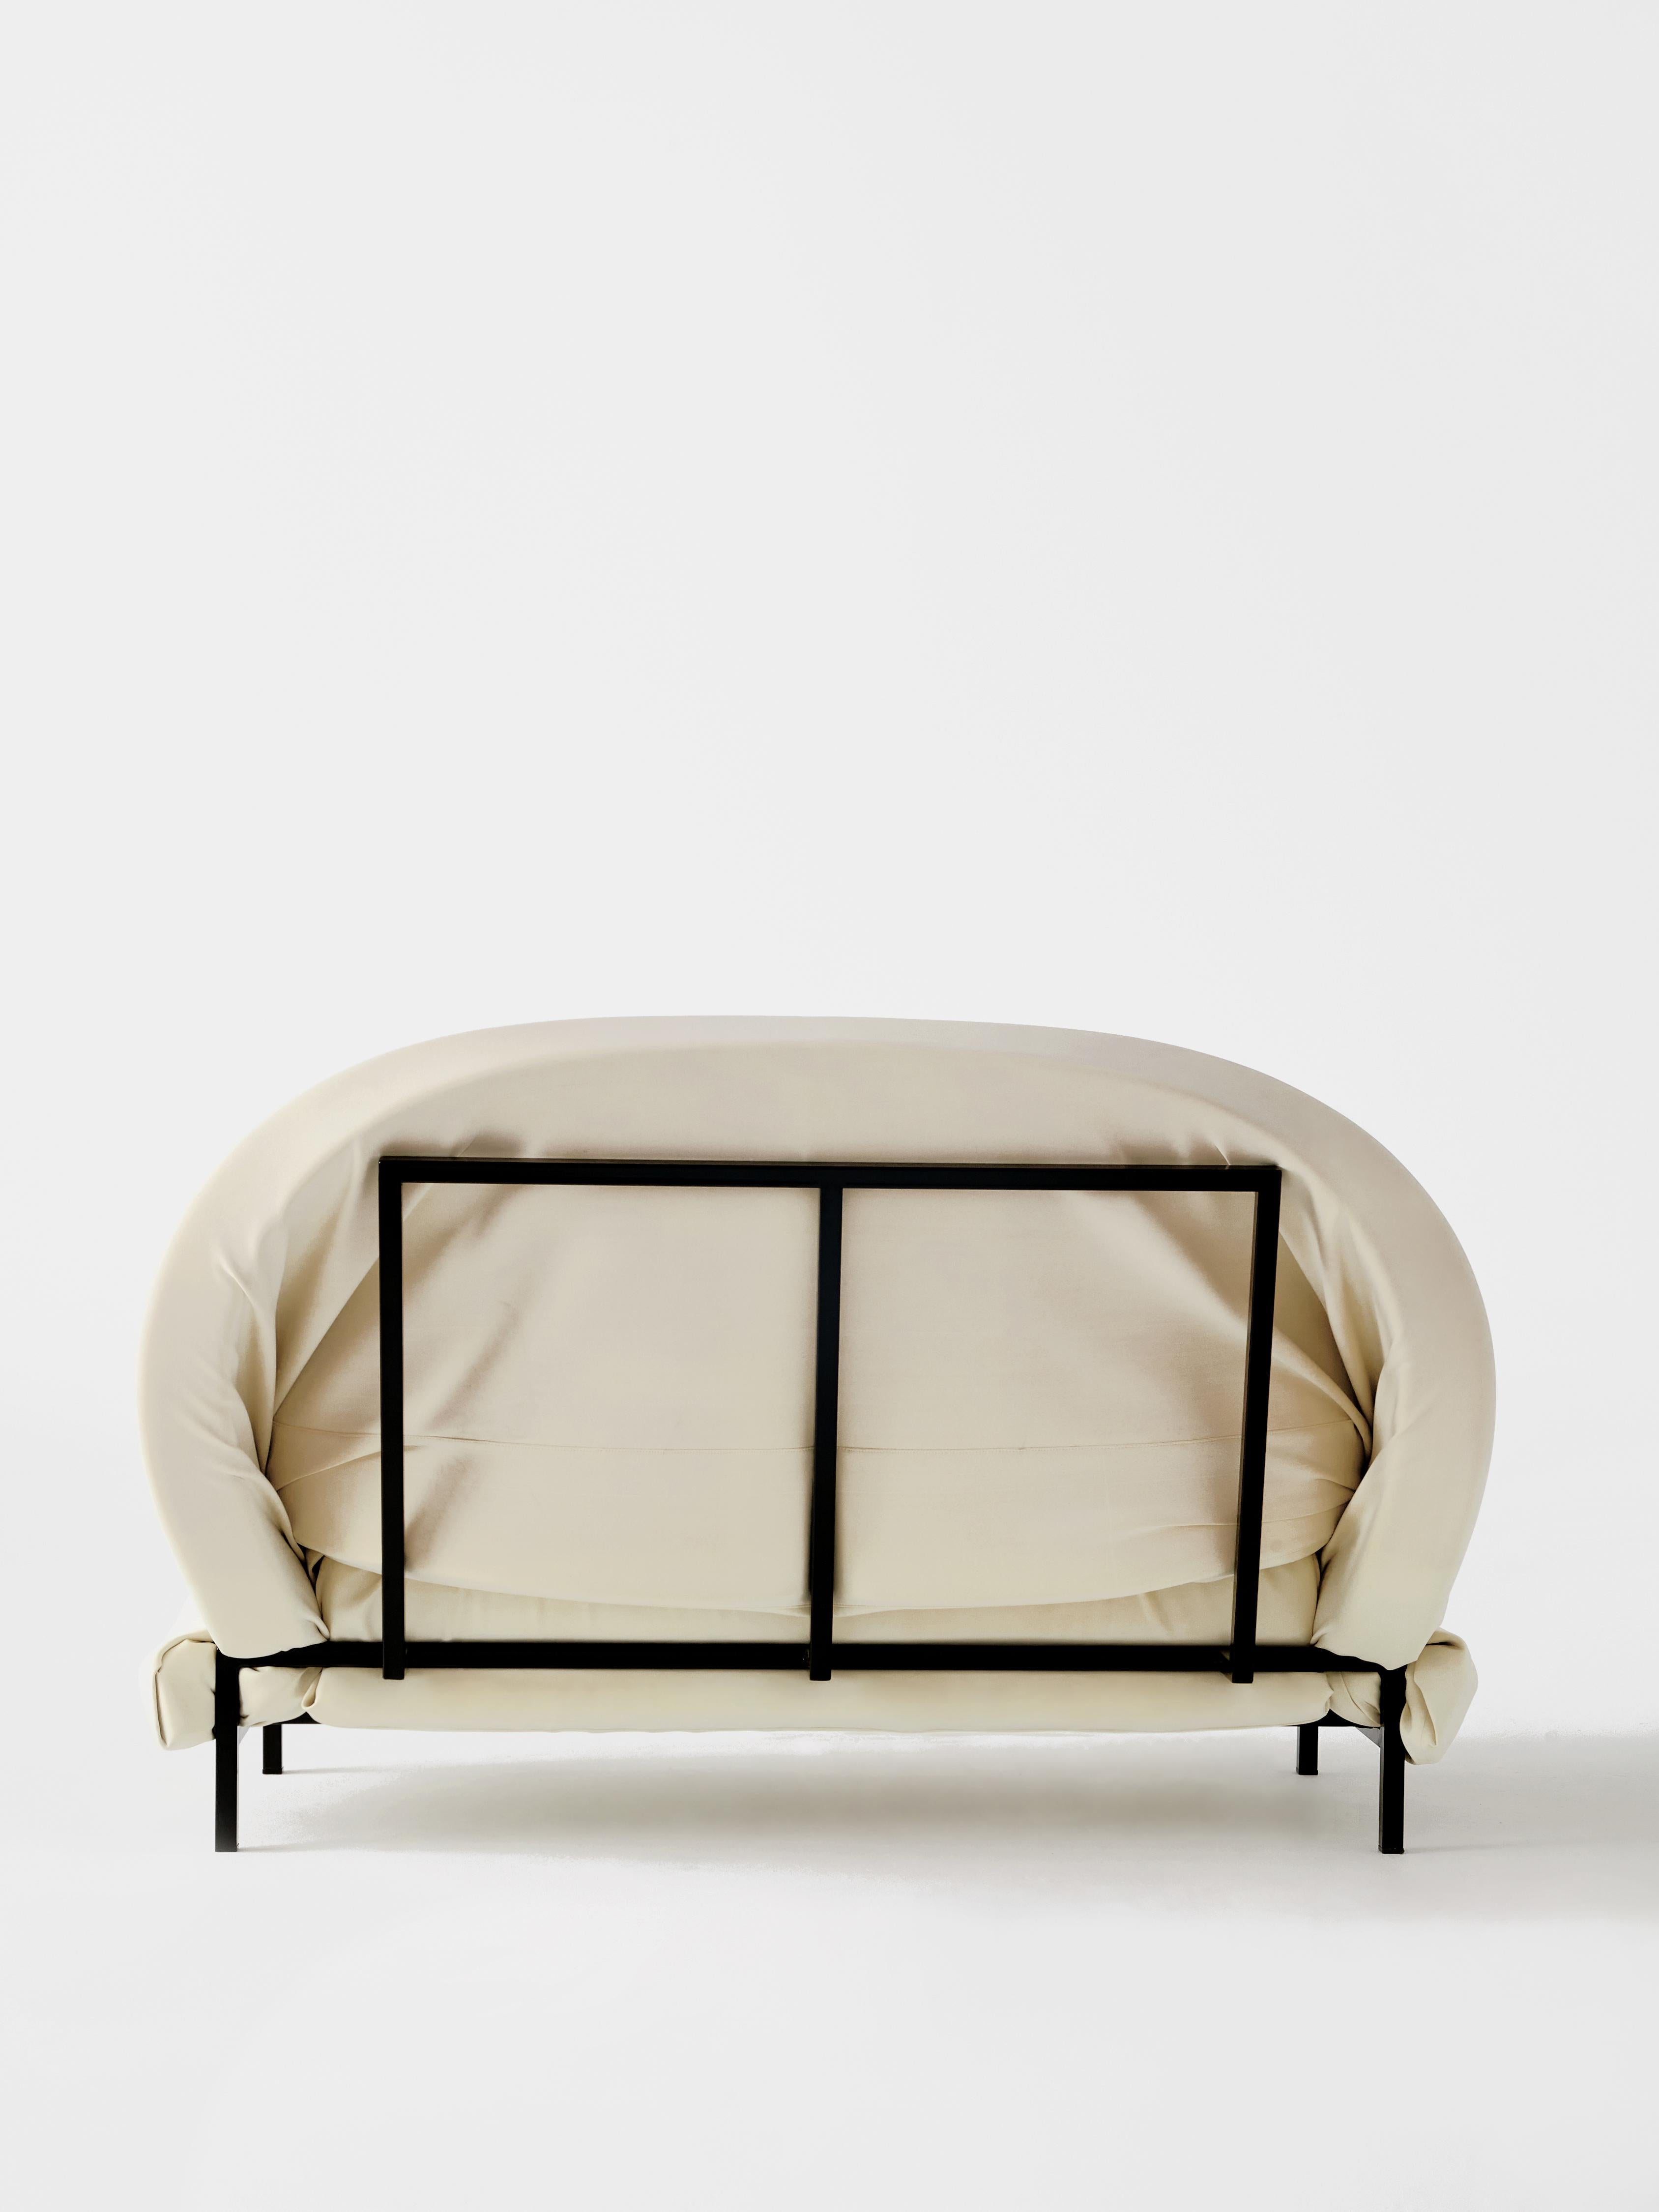 The '360º Diagonal' sofa is part of the 'Bent Foam, Metal Frame' collection commissioned by the Machado Muñoz Gallery (Madrid, Spain). It was first presented in 2017 in the ARCO Art Fair (Madrid, Spain). 

This Playful, Brutalist, and yet Stylized